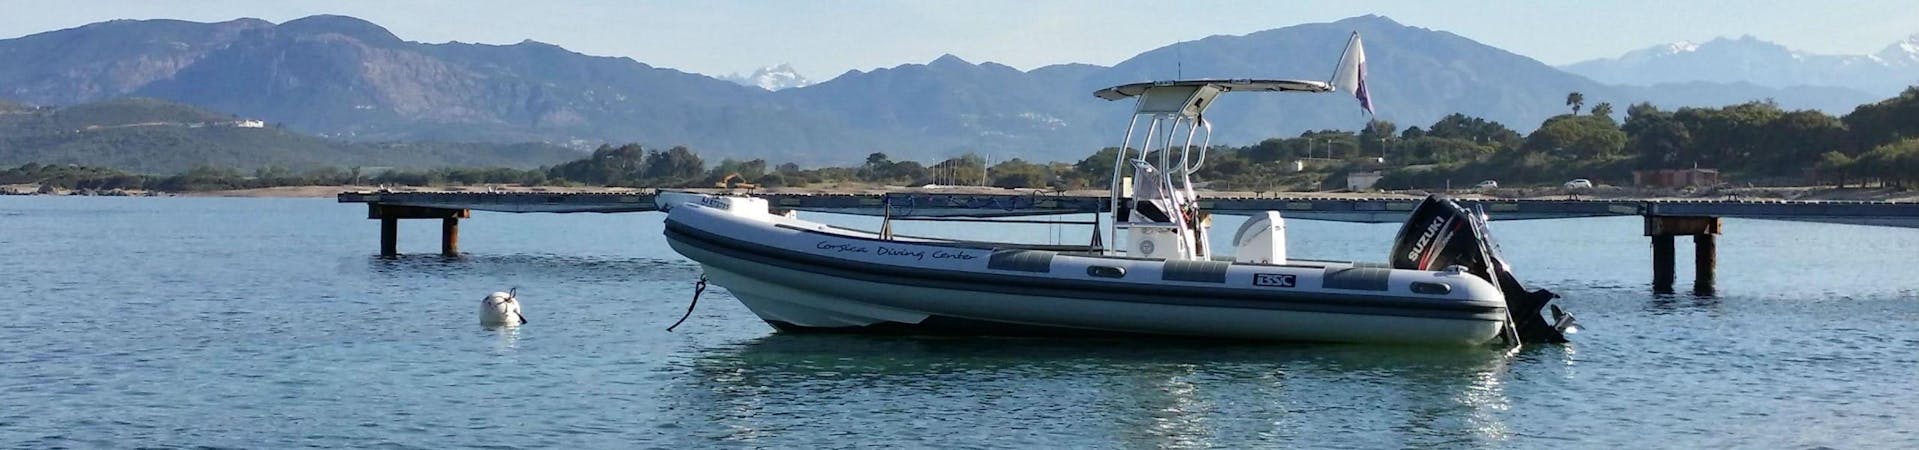 Picture of the boat from the Guided Boat Dives in Golfe d'Ajaccio for Certified Divers activity operated by Maeva Plongée.